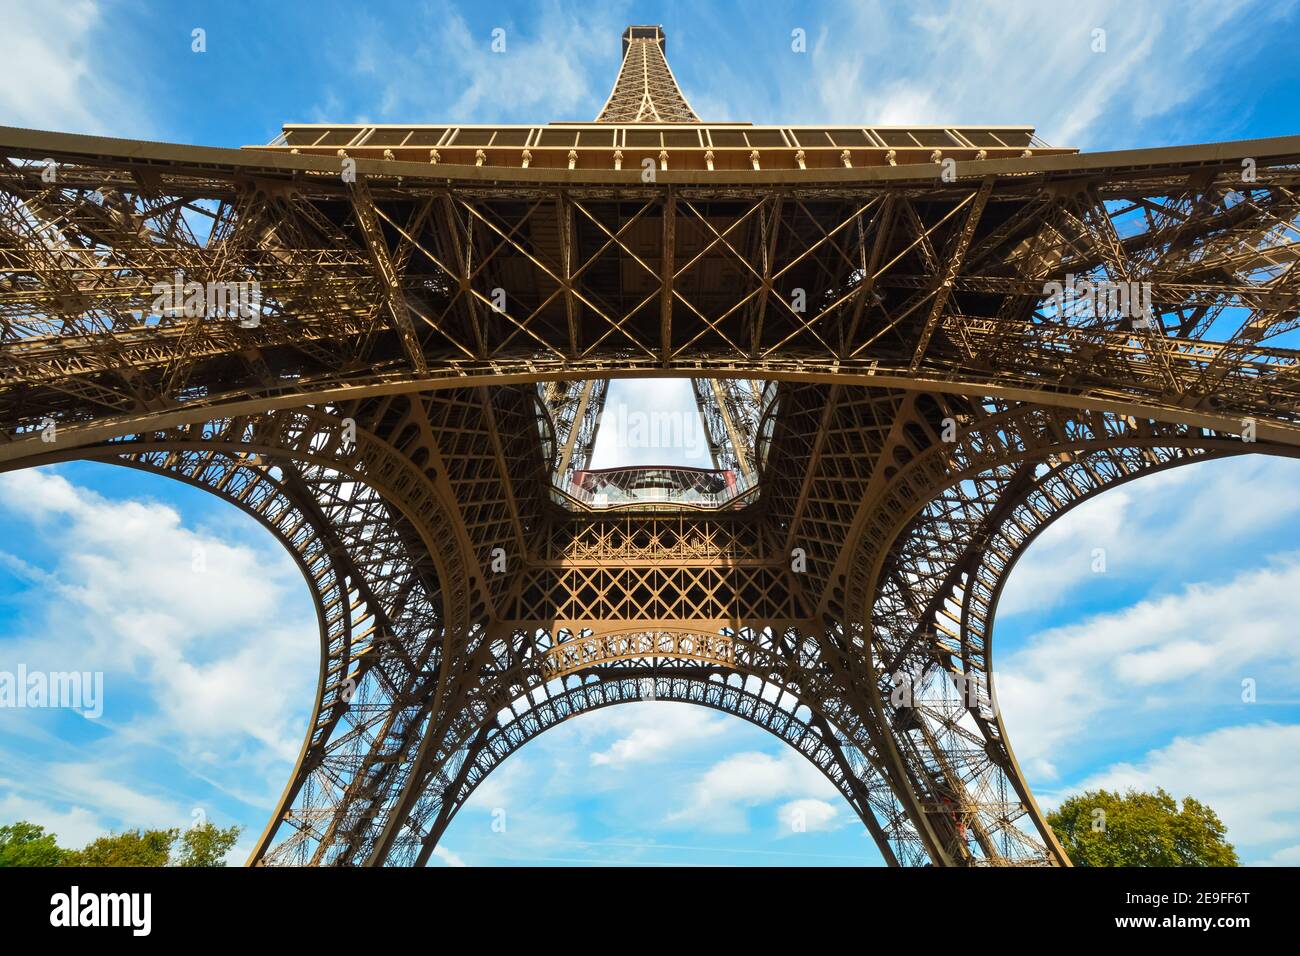 View looking up from underneath the Eiffel Tower in Paris, France. Stock Photo